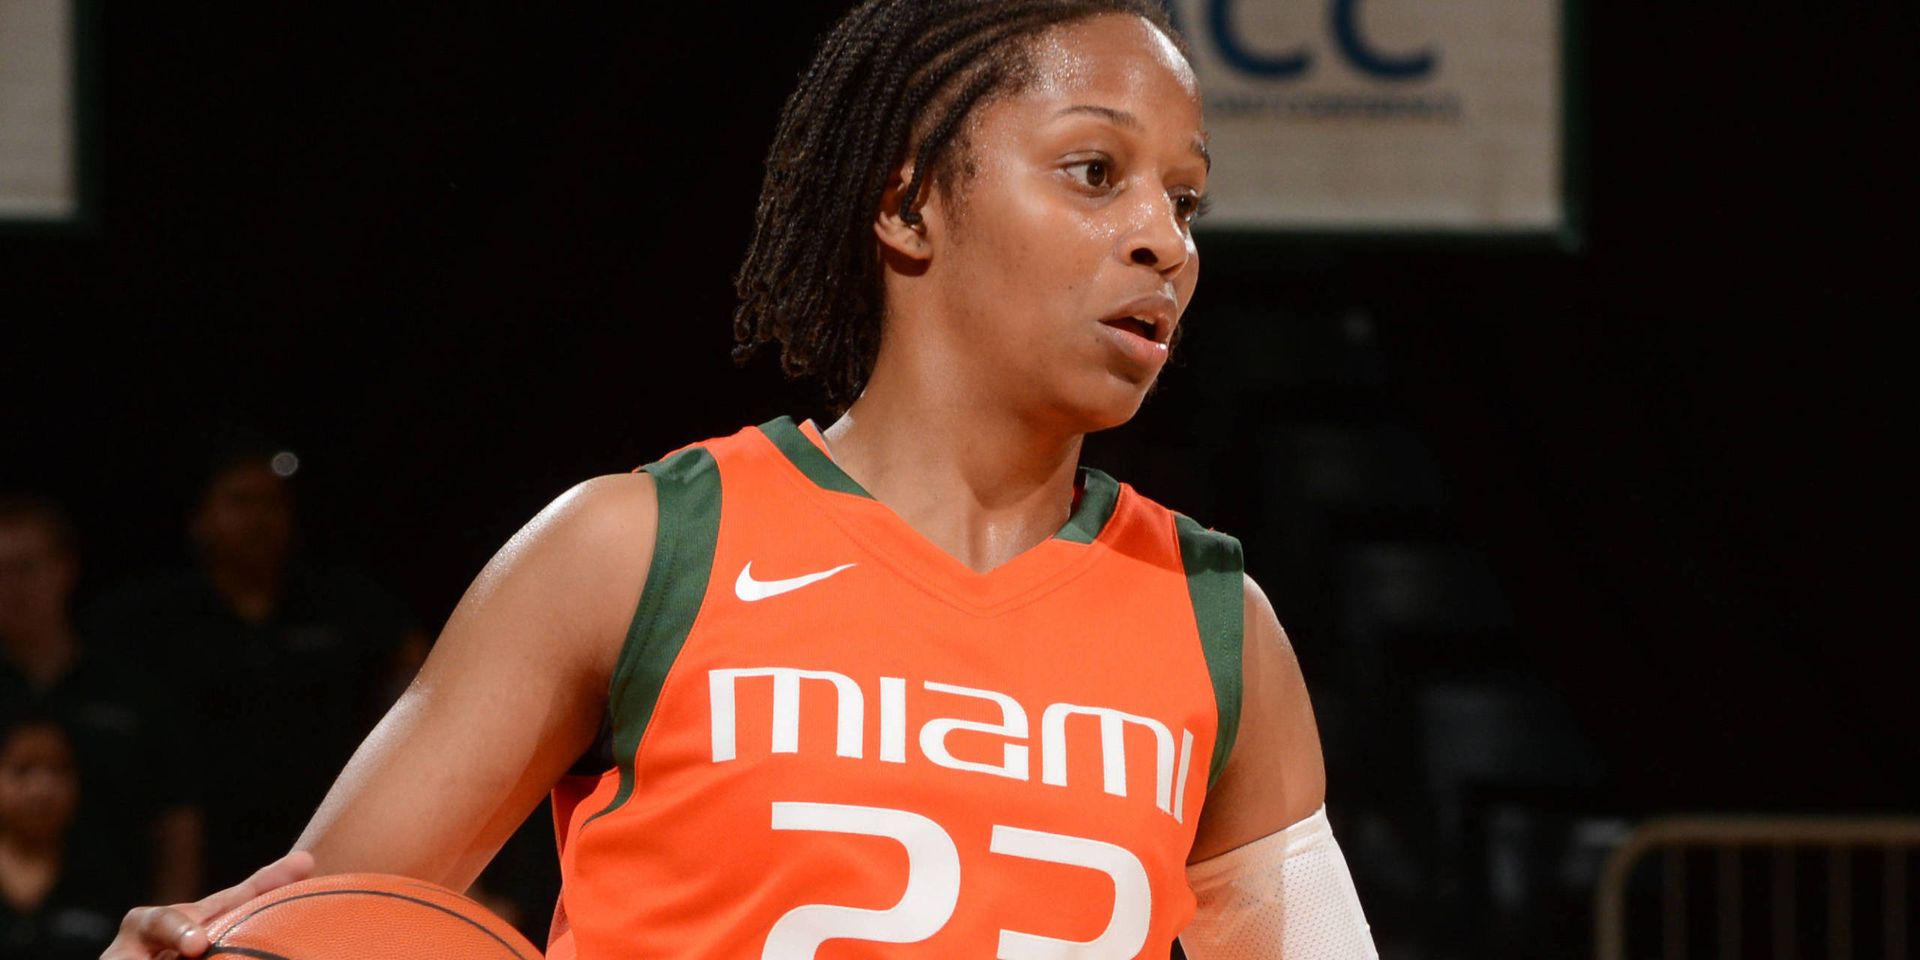 @MiamiWBB Moves ACC Record to 3-0 With Win